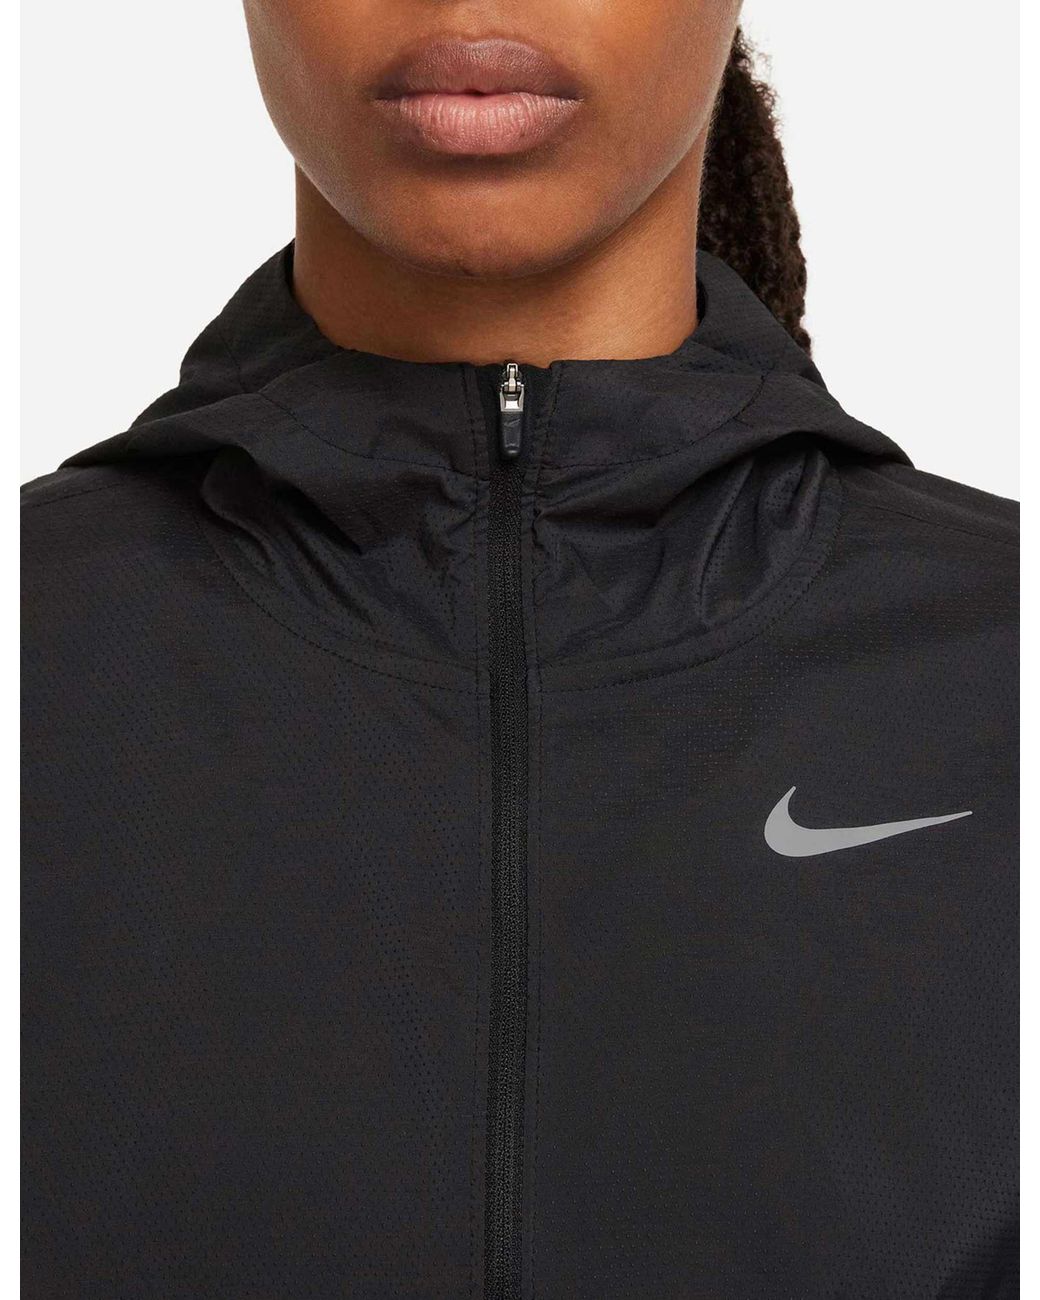 Nike Impossibly Light Jacket in Black | Lyst